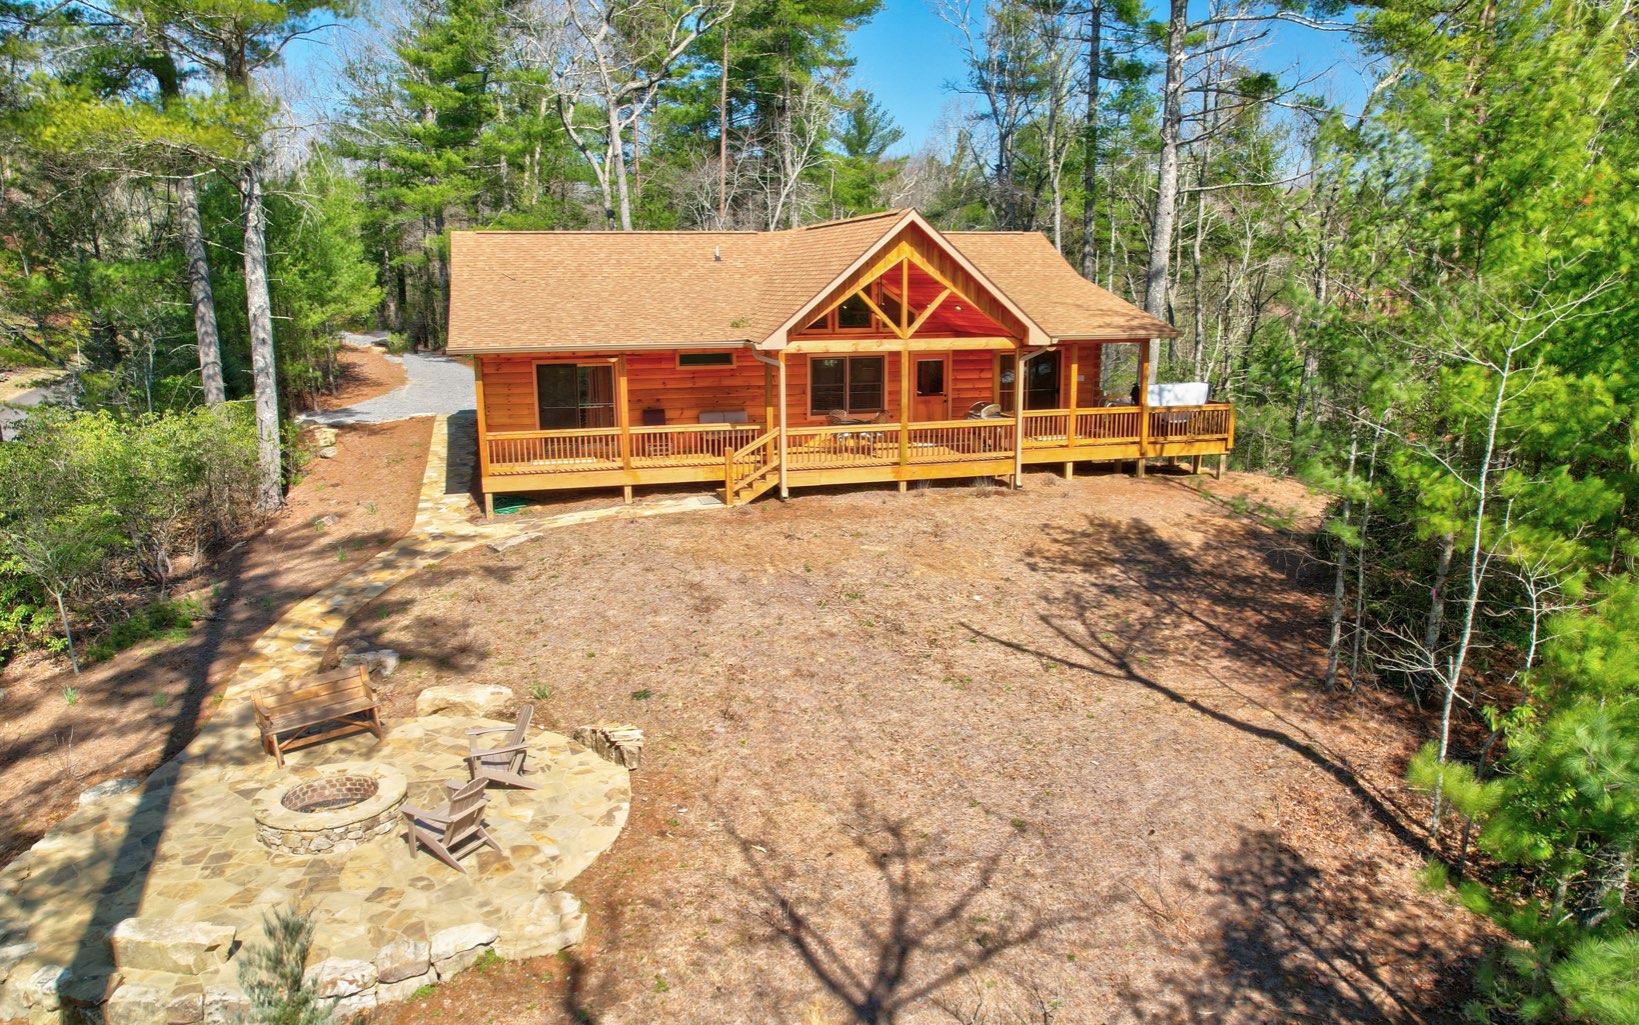 Long range mtn views, ADA compliant, true log, amazing landscaped level yard with outdoor firepit, covered parking, granite countertops, less than 2 miles to downtown Blue Ridge?? This 3 bedroom/2 bath open concept log cabin in beautiful North GA mountains is a 2 yr old all one level hitting all of those plus is a successful STR being sold turn key with wrap around decks, hot tub, and upgrades galore. Schedule your showing today.